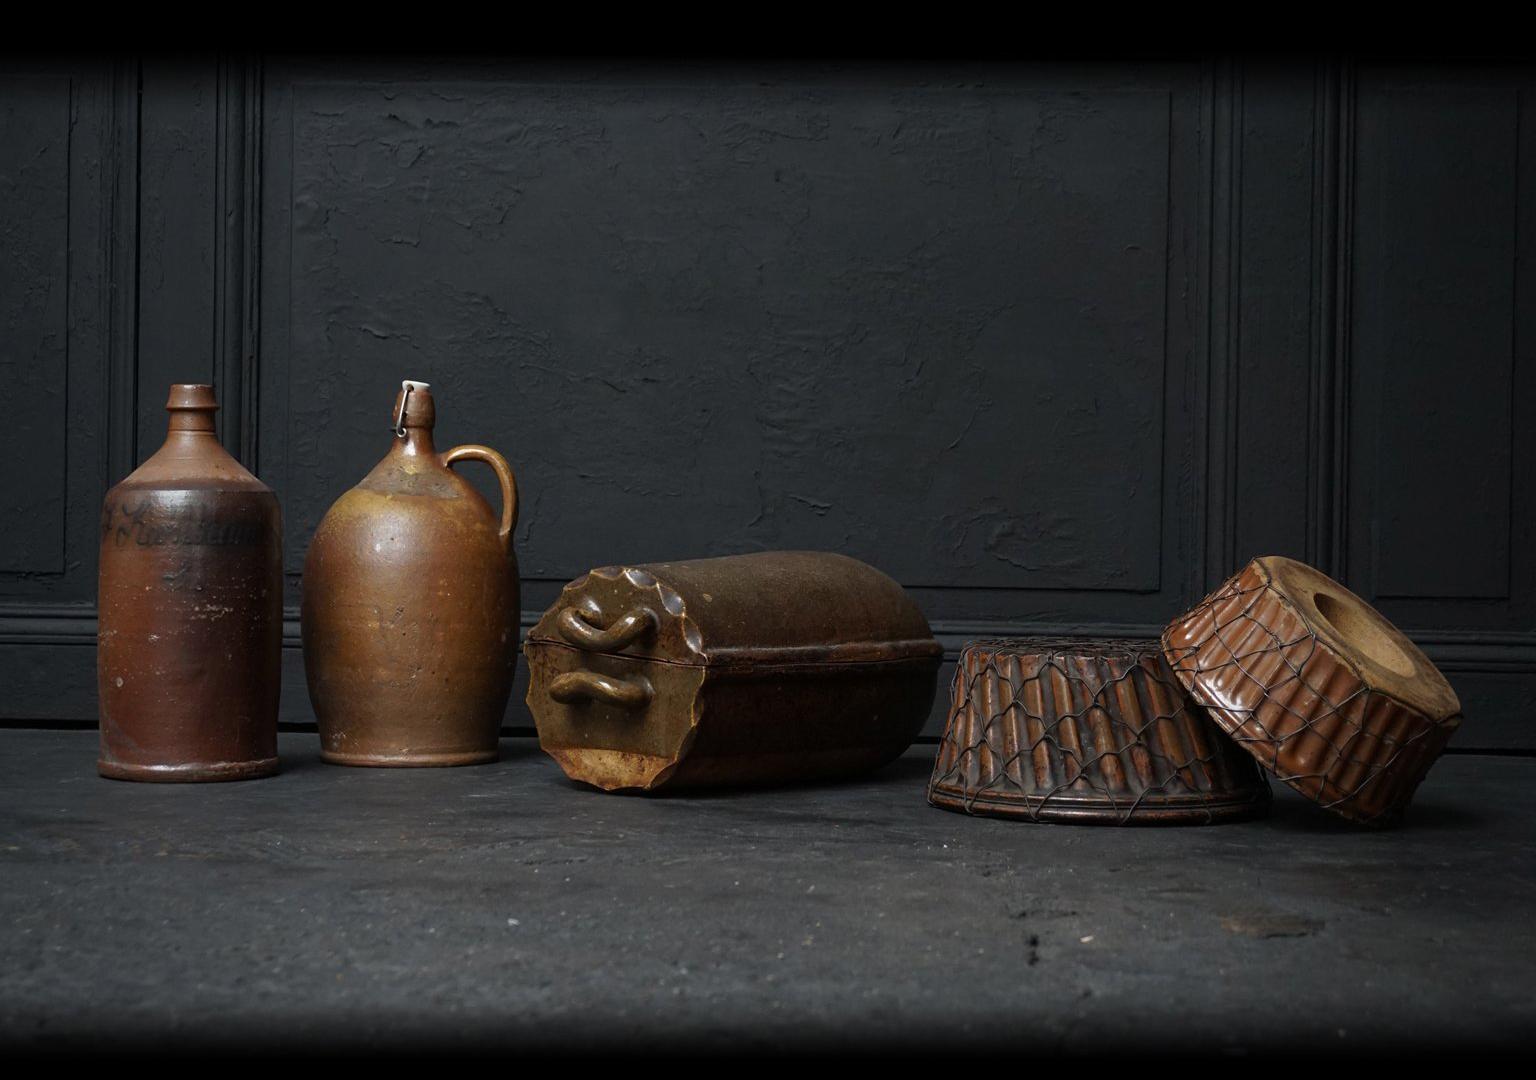 Lovely set of five antique German Earthenware kitchen objects.

You see two large beer bottles or jugs.
Two Gugelhupf moulds (or Kouglof) for baking cake. Both moulds are visibly mended in a very decorative way.
And a real old fashioned Römertopf to